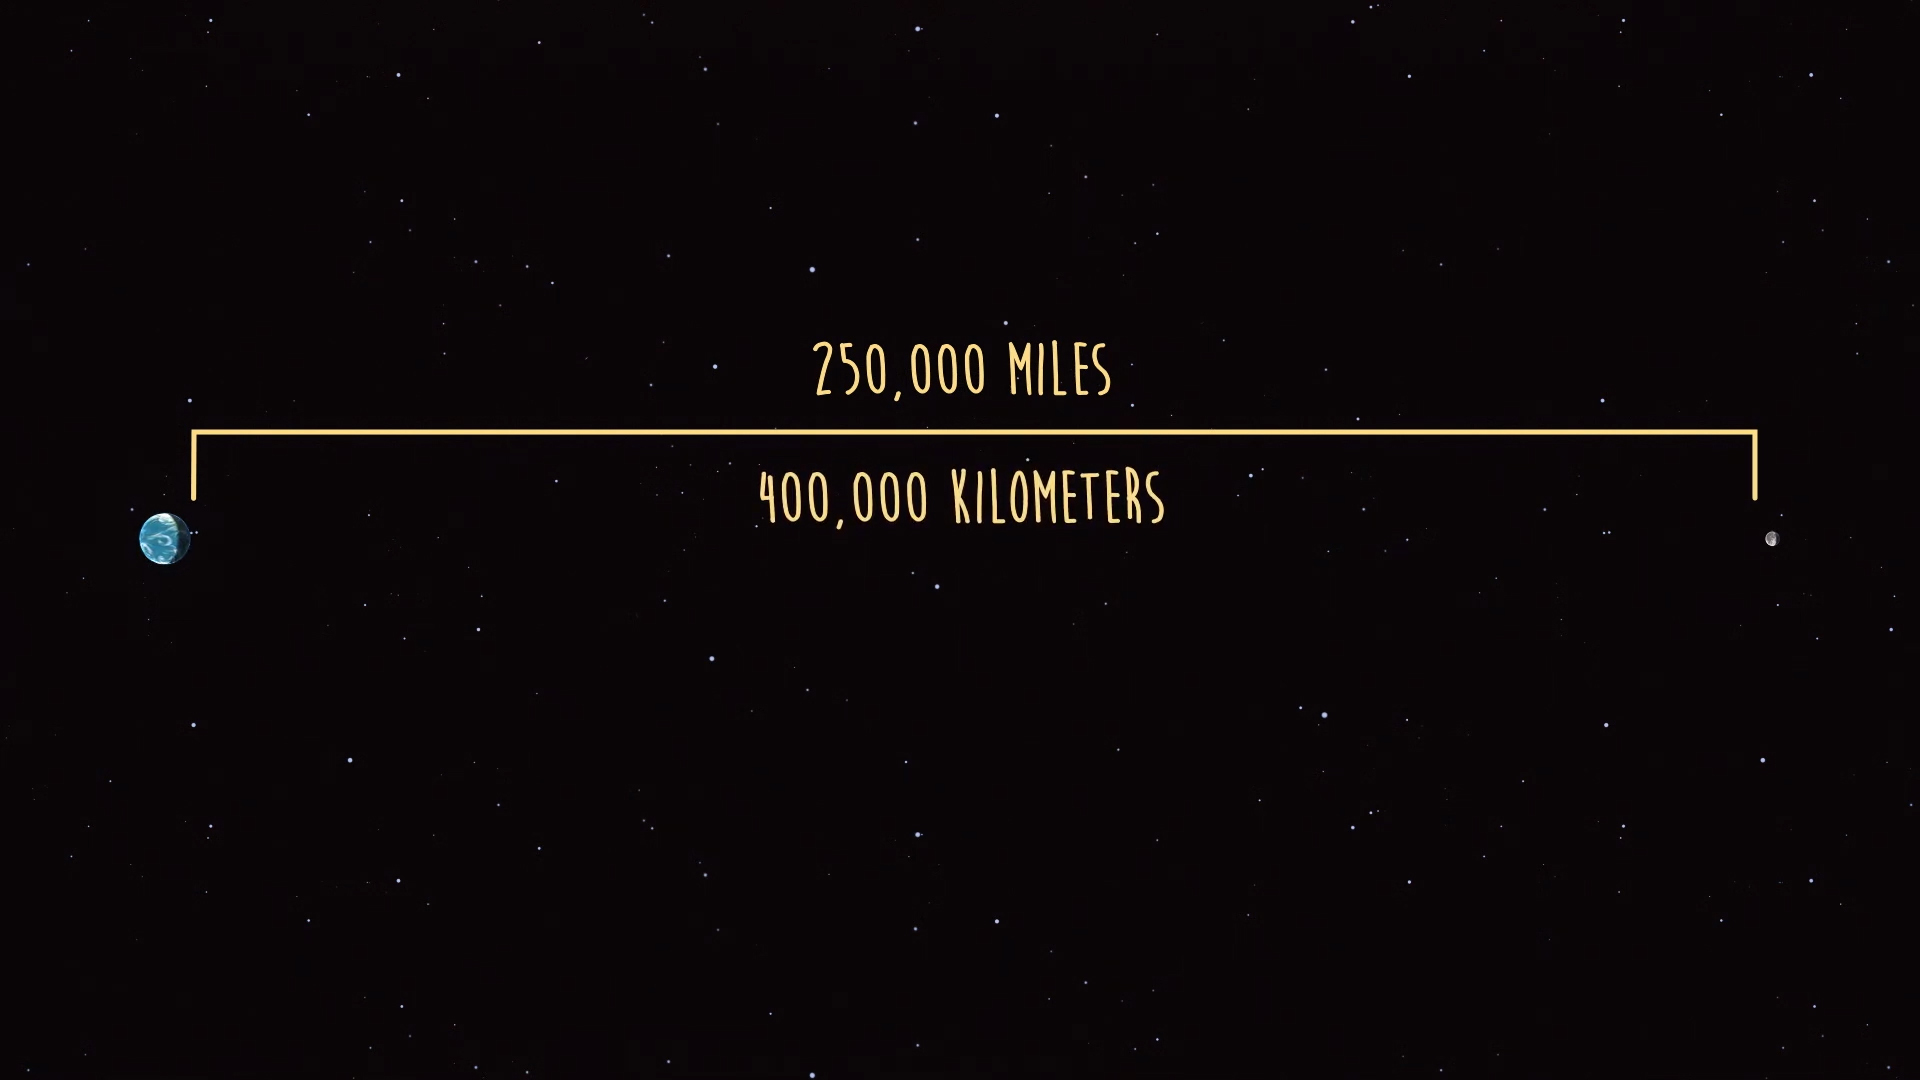 Illustration showing distance between Earth and Moon is 250,000 miles or about 400,000 kilometers.